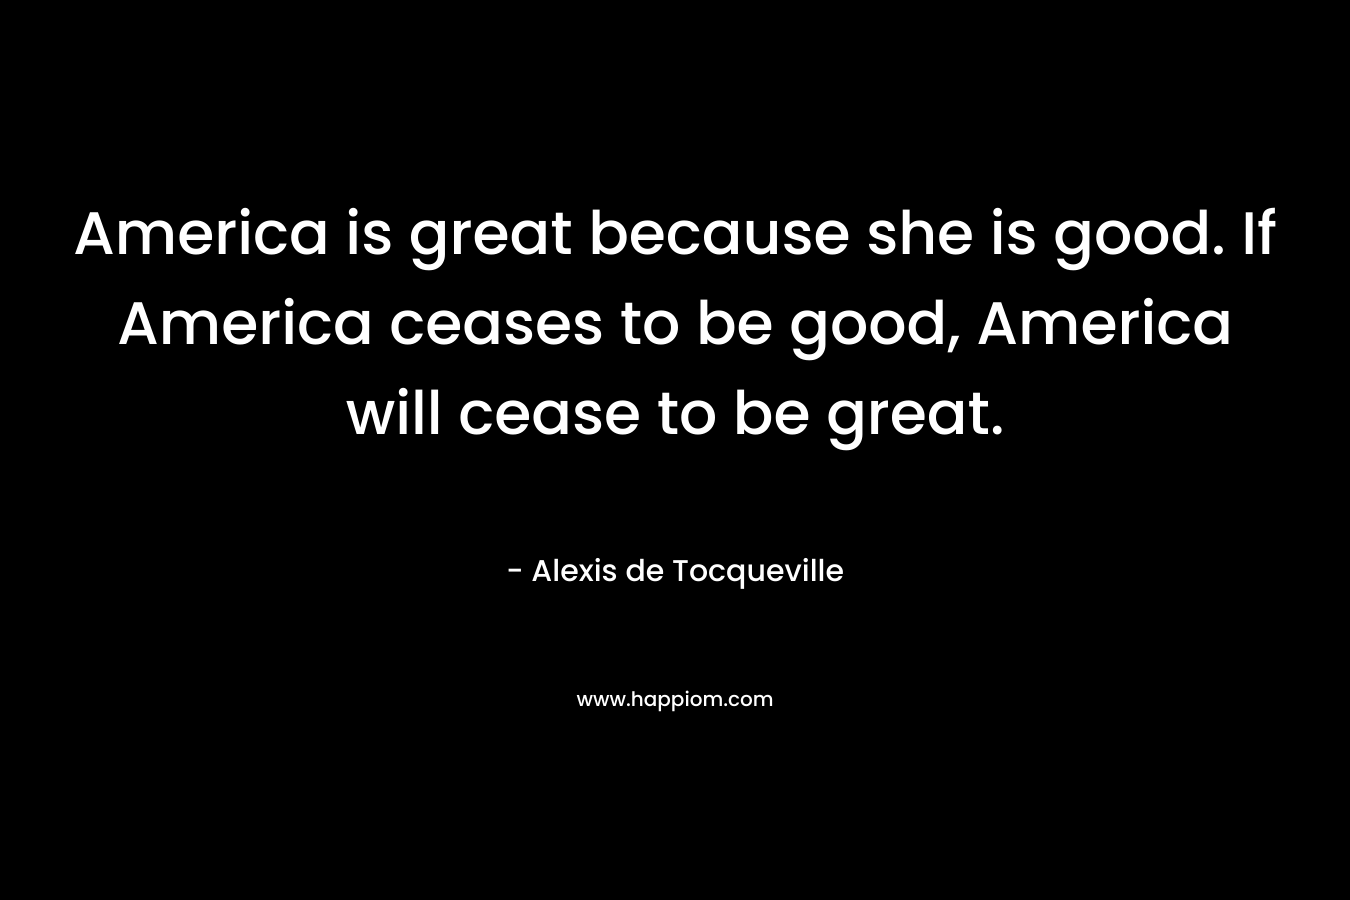 America is great because she is good. If America ceases to be good, America will cease to be great. – Alexis de Tocqueville